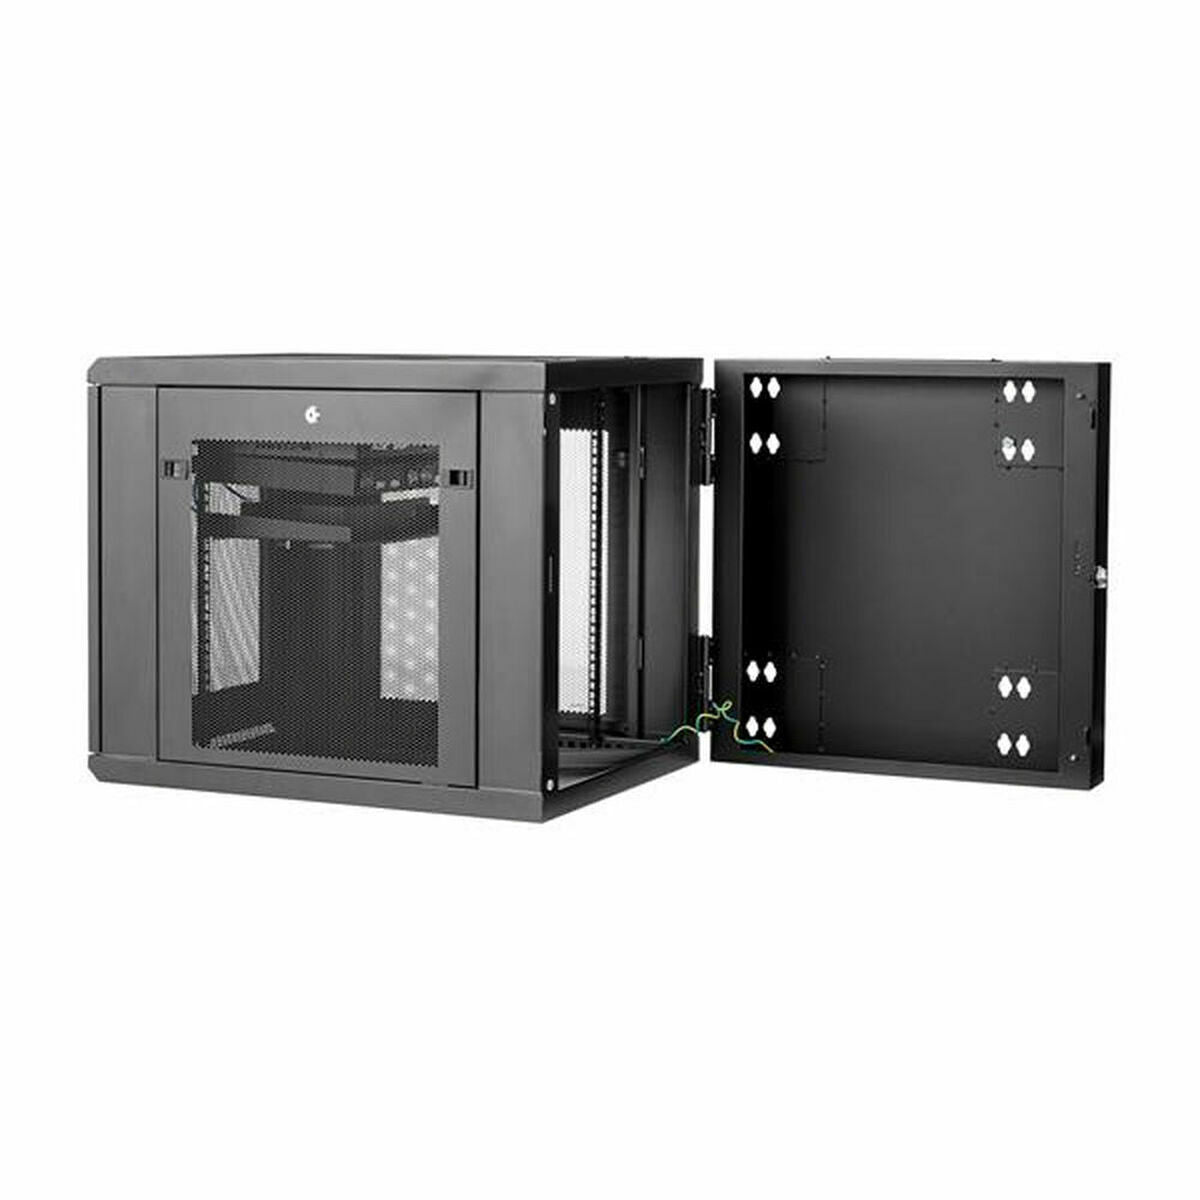 Wall-mounted Rack Cabinet Startech RK1232WALHM, Startech, Computing, Accessories, wall-mounted-rack-cabinet-startech-rk1232walhm, Brand_Startech, category-reference-2609, category-reference-2803, category-reference-2828, category-reference-t-19685, category-reference-t-19908, category-reference-t-21349, Condition_NEW, furniture, networks/wiring, organisation, Price_600 - 700, Teleworking, RiotNook